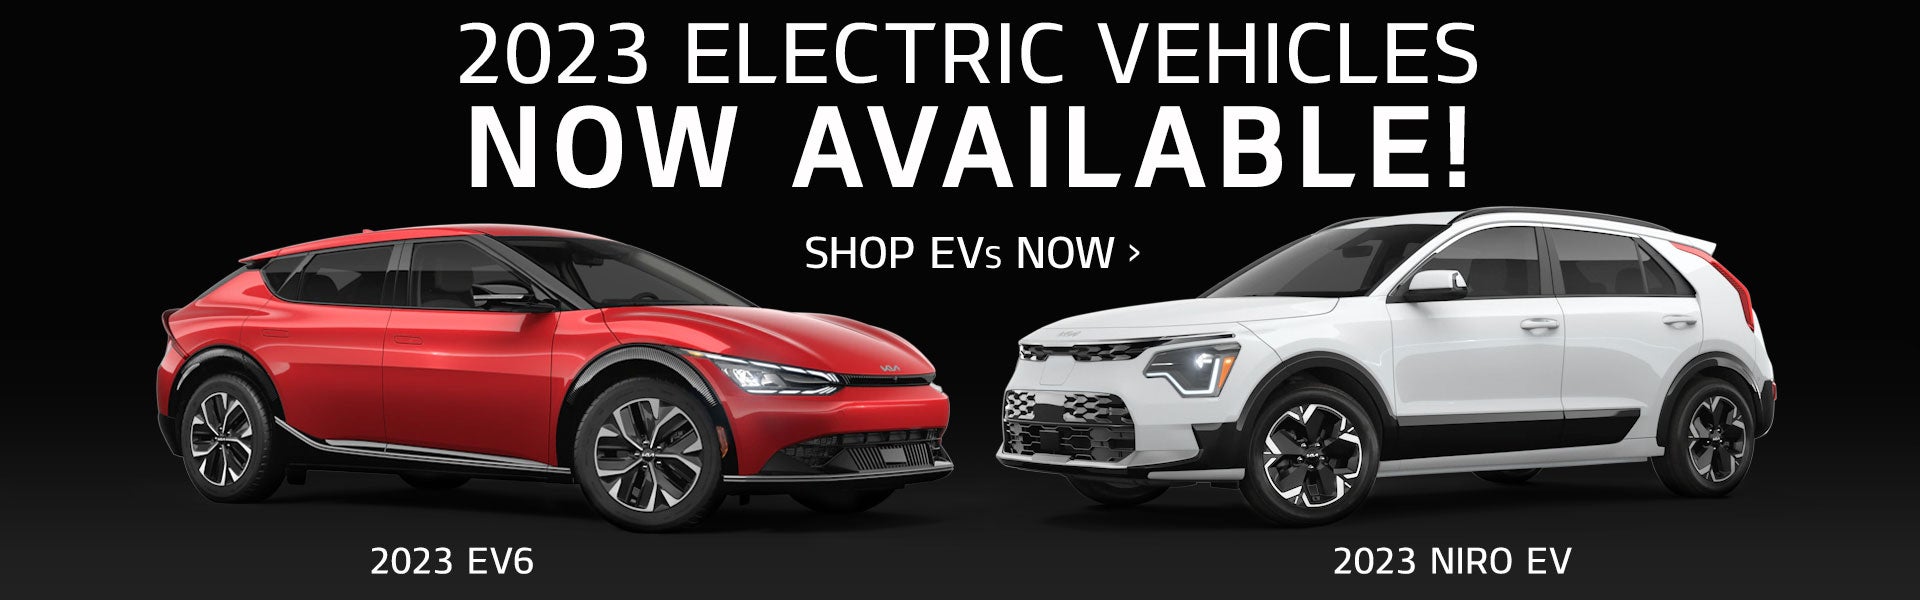 EVs Now Available